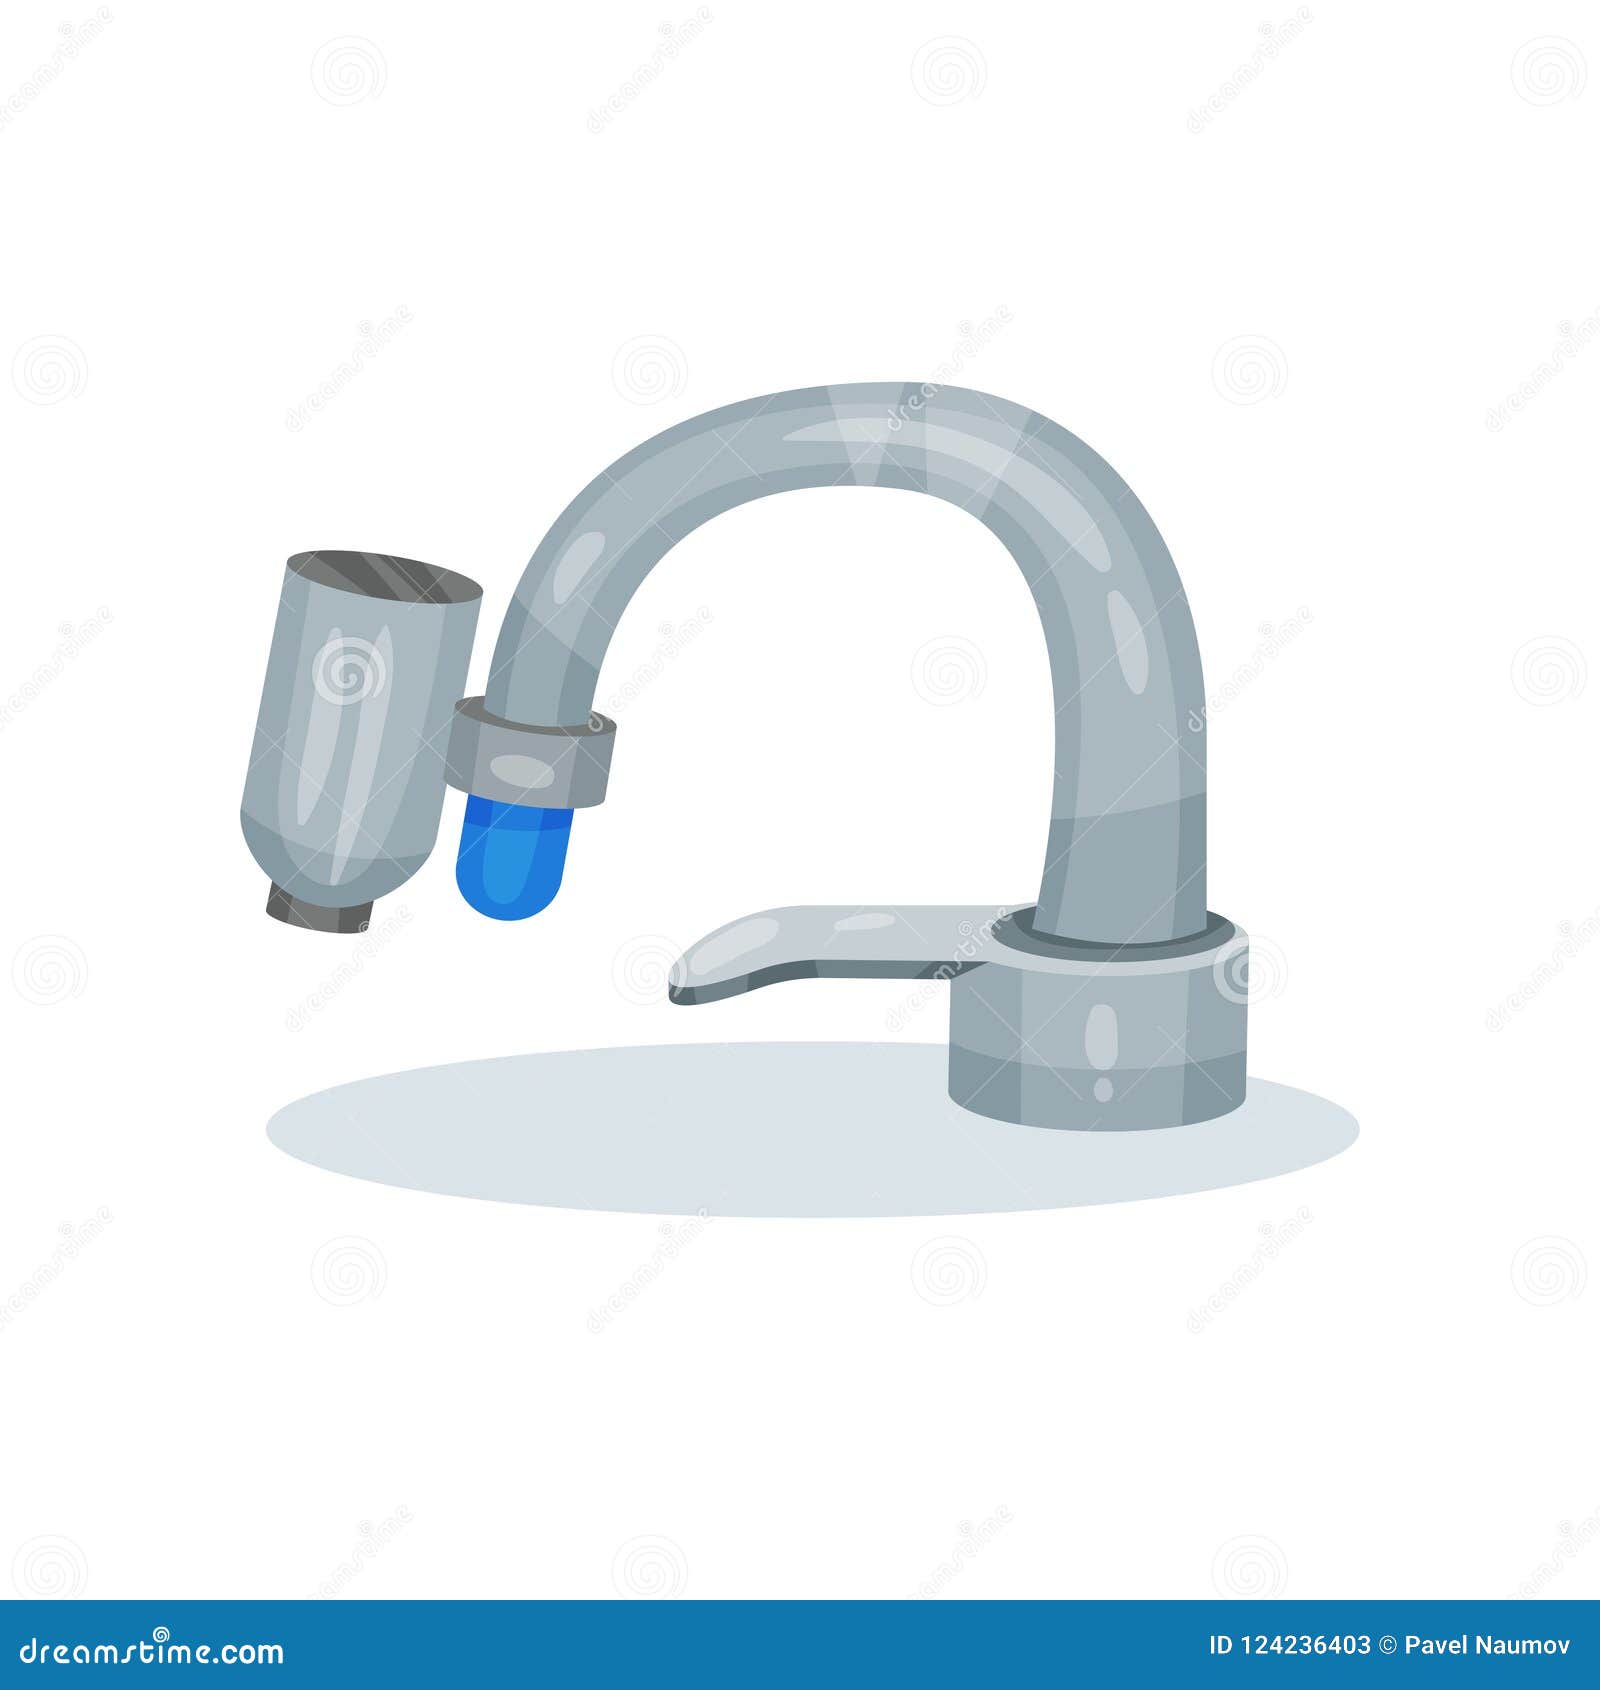 Flat Vector Icon Of Gray Metal Kitchen Faucet With Water Filter